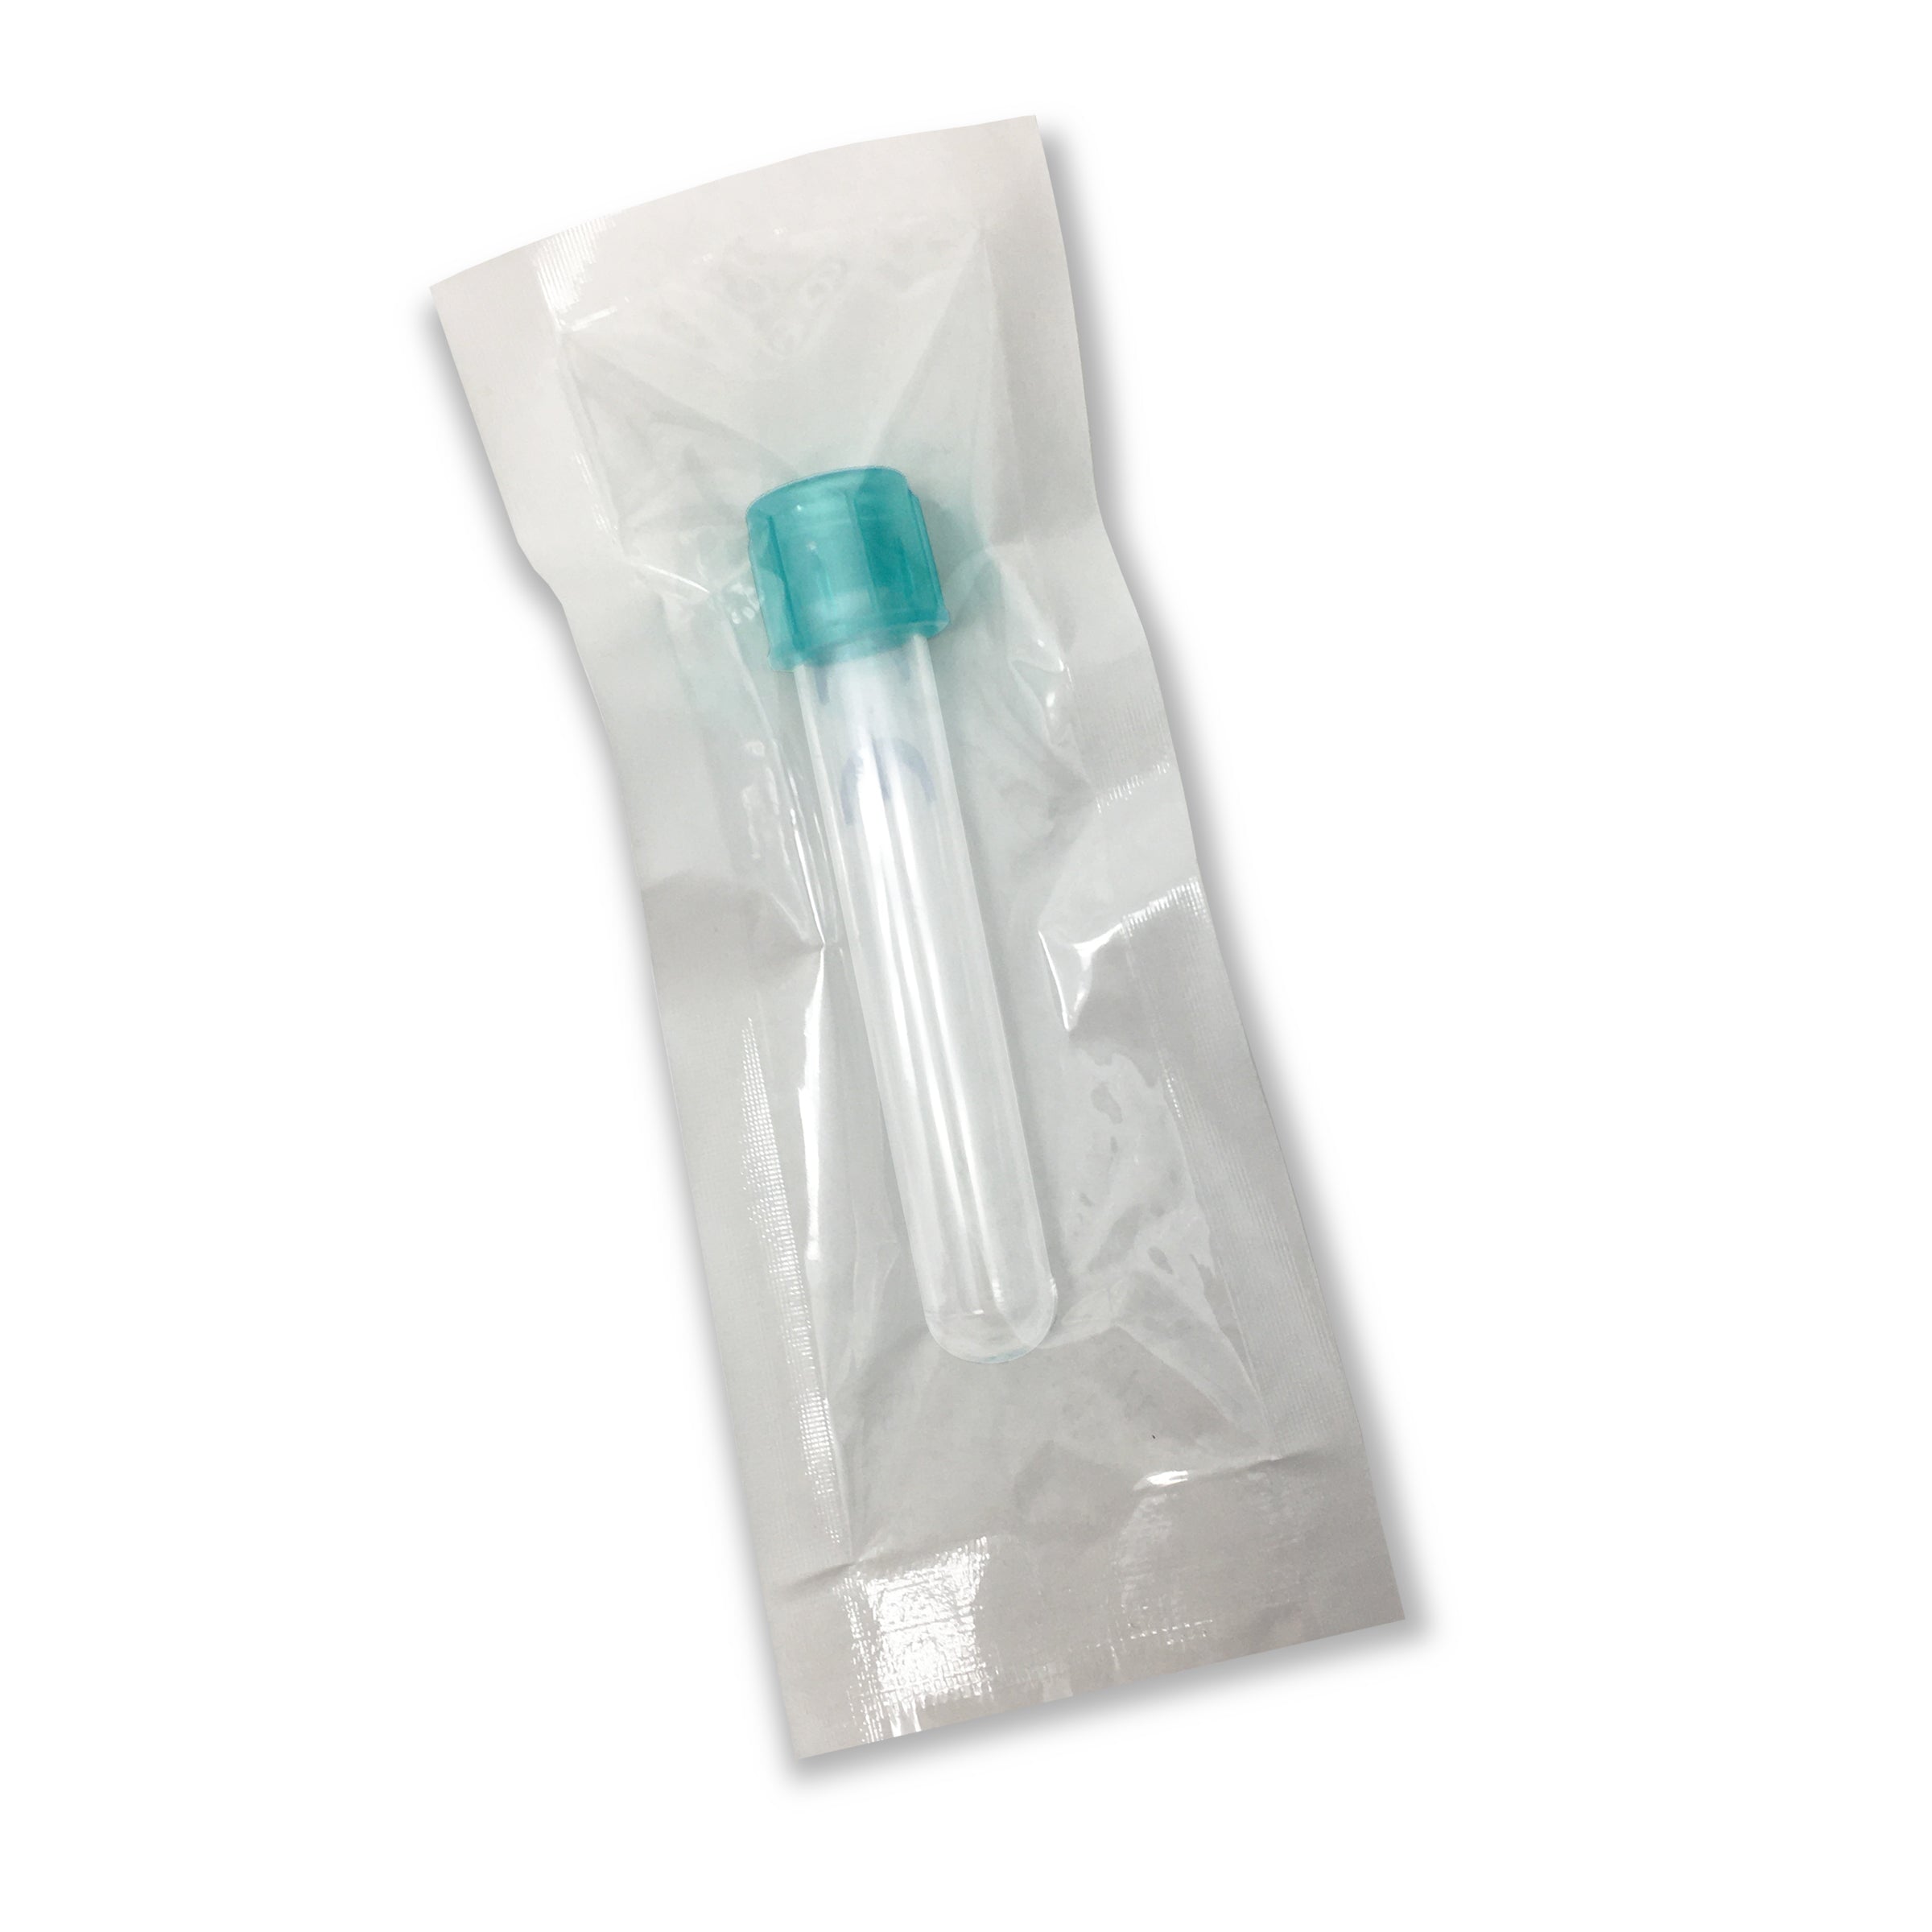 MTC Bio T9005-1S FlowTubes™ with strainer cap, 12x75mm, sterile, individually wrapped , 500/cs